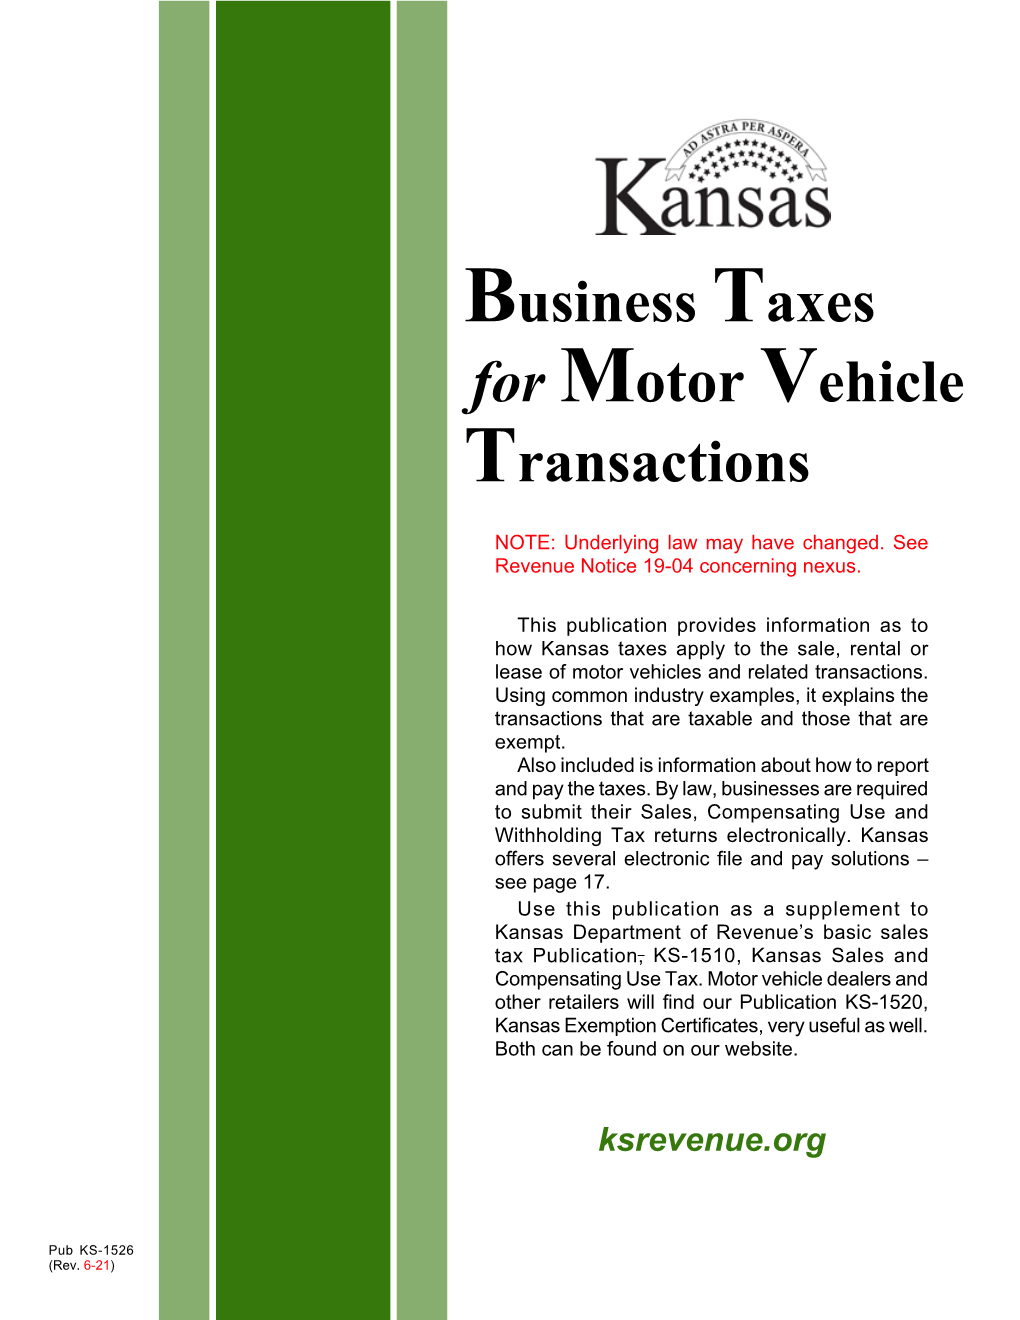 Pub. KS-1526, Sales and Use Tax for Motor Vehicle